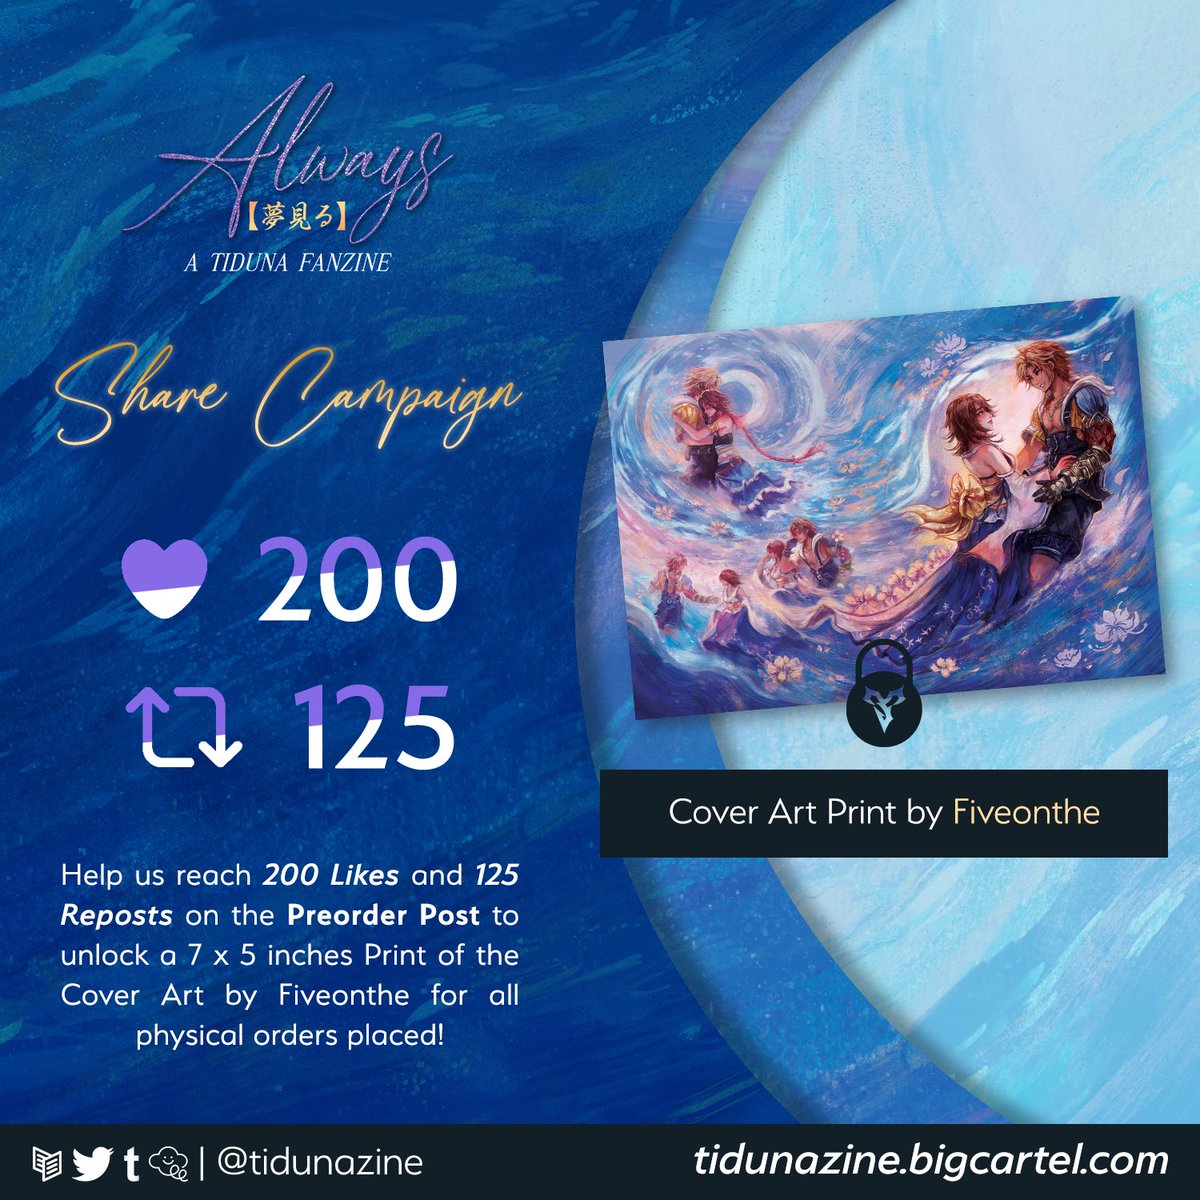 ☀️ SHARE CAMPAIGN 🌙 Want more? We’ve got you covered! 💜 Help us reach 200 likes and 125 retweets on our pre-orders post, and ALL physical bundles will receive a print of @fiveonthe’s gorgeous cover art! ✨